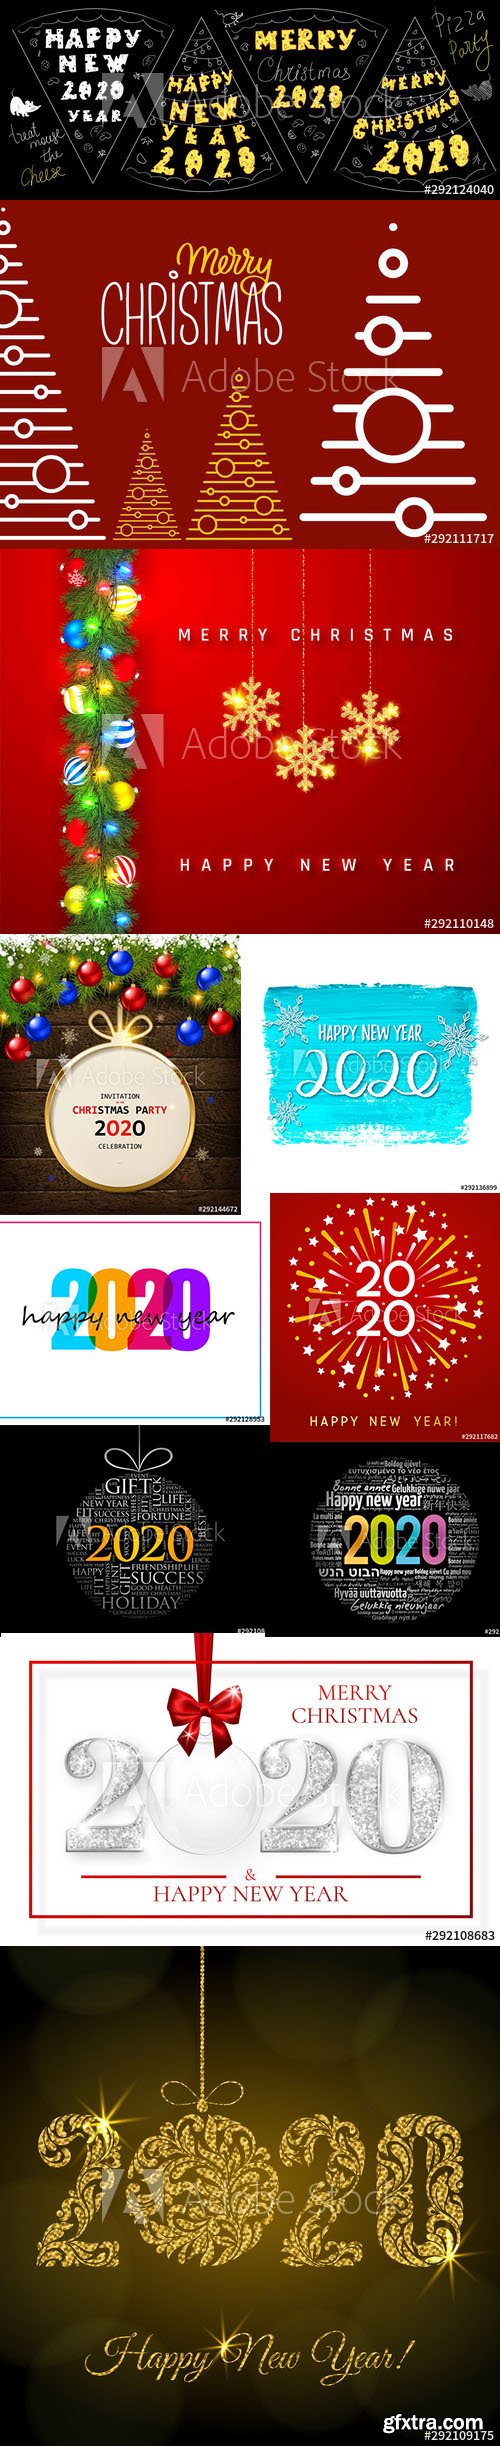 Merry Christmas and Happy New Year 2020 Illustrations Vector Set 6